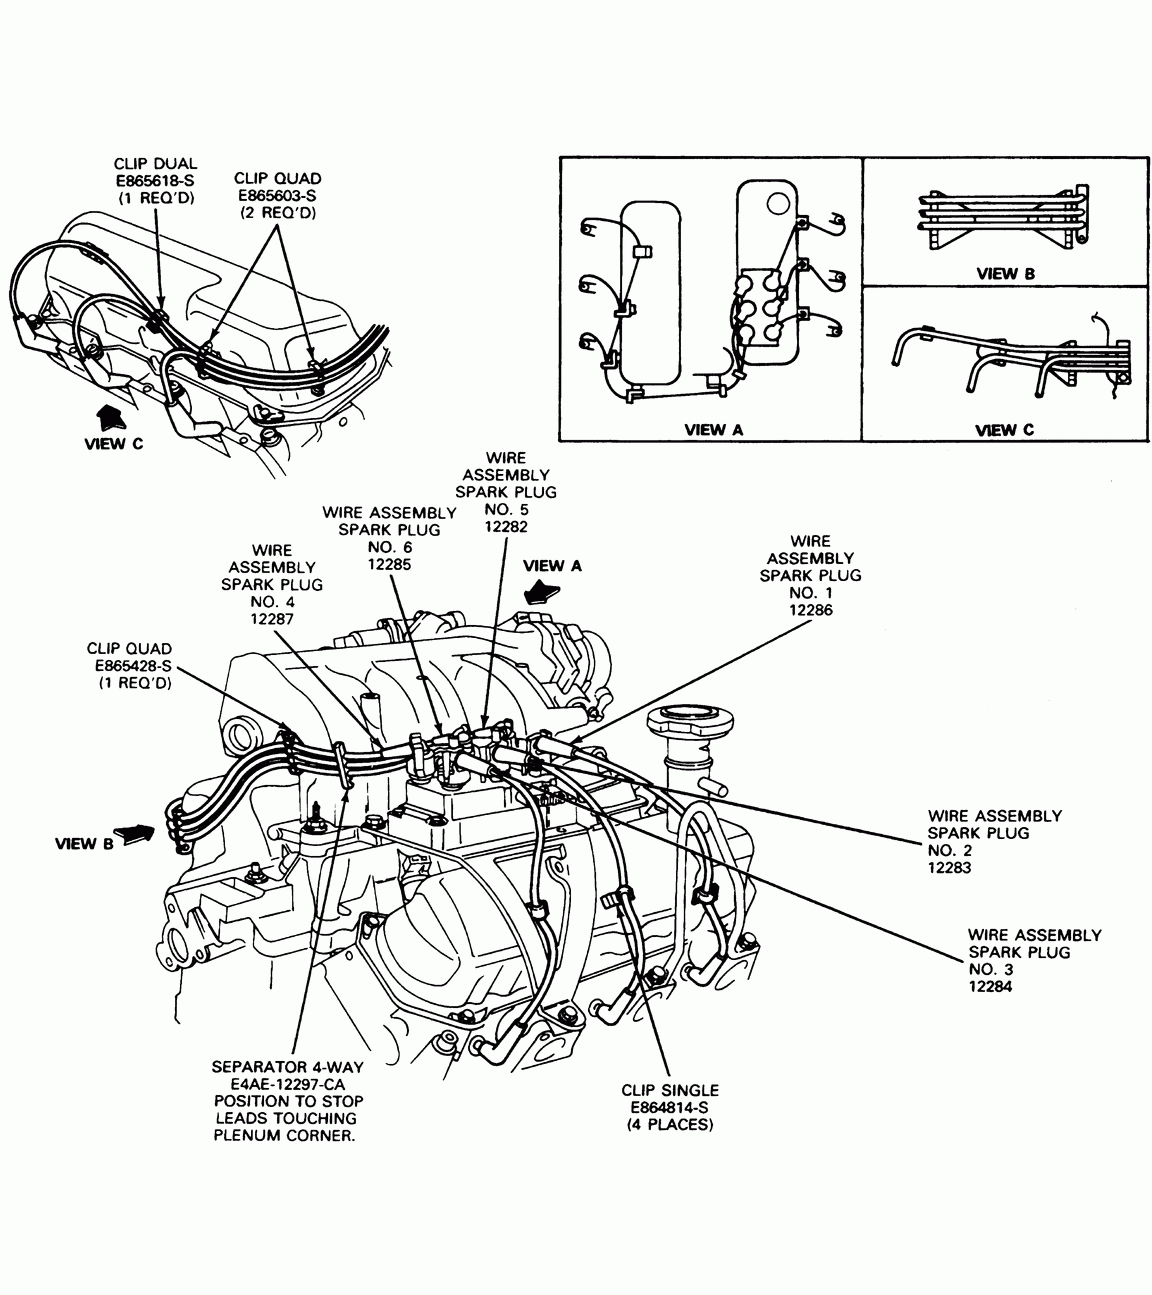 Does Anyone Have A Firing Diagram For A 1998 Ford Explorer